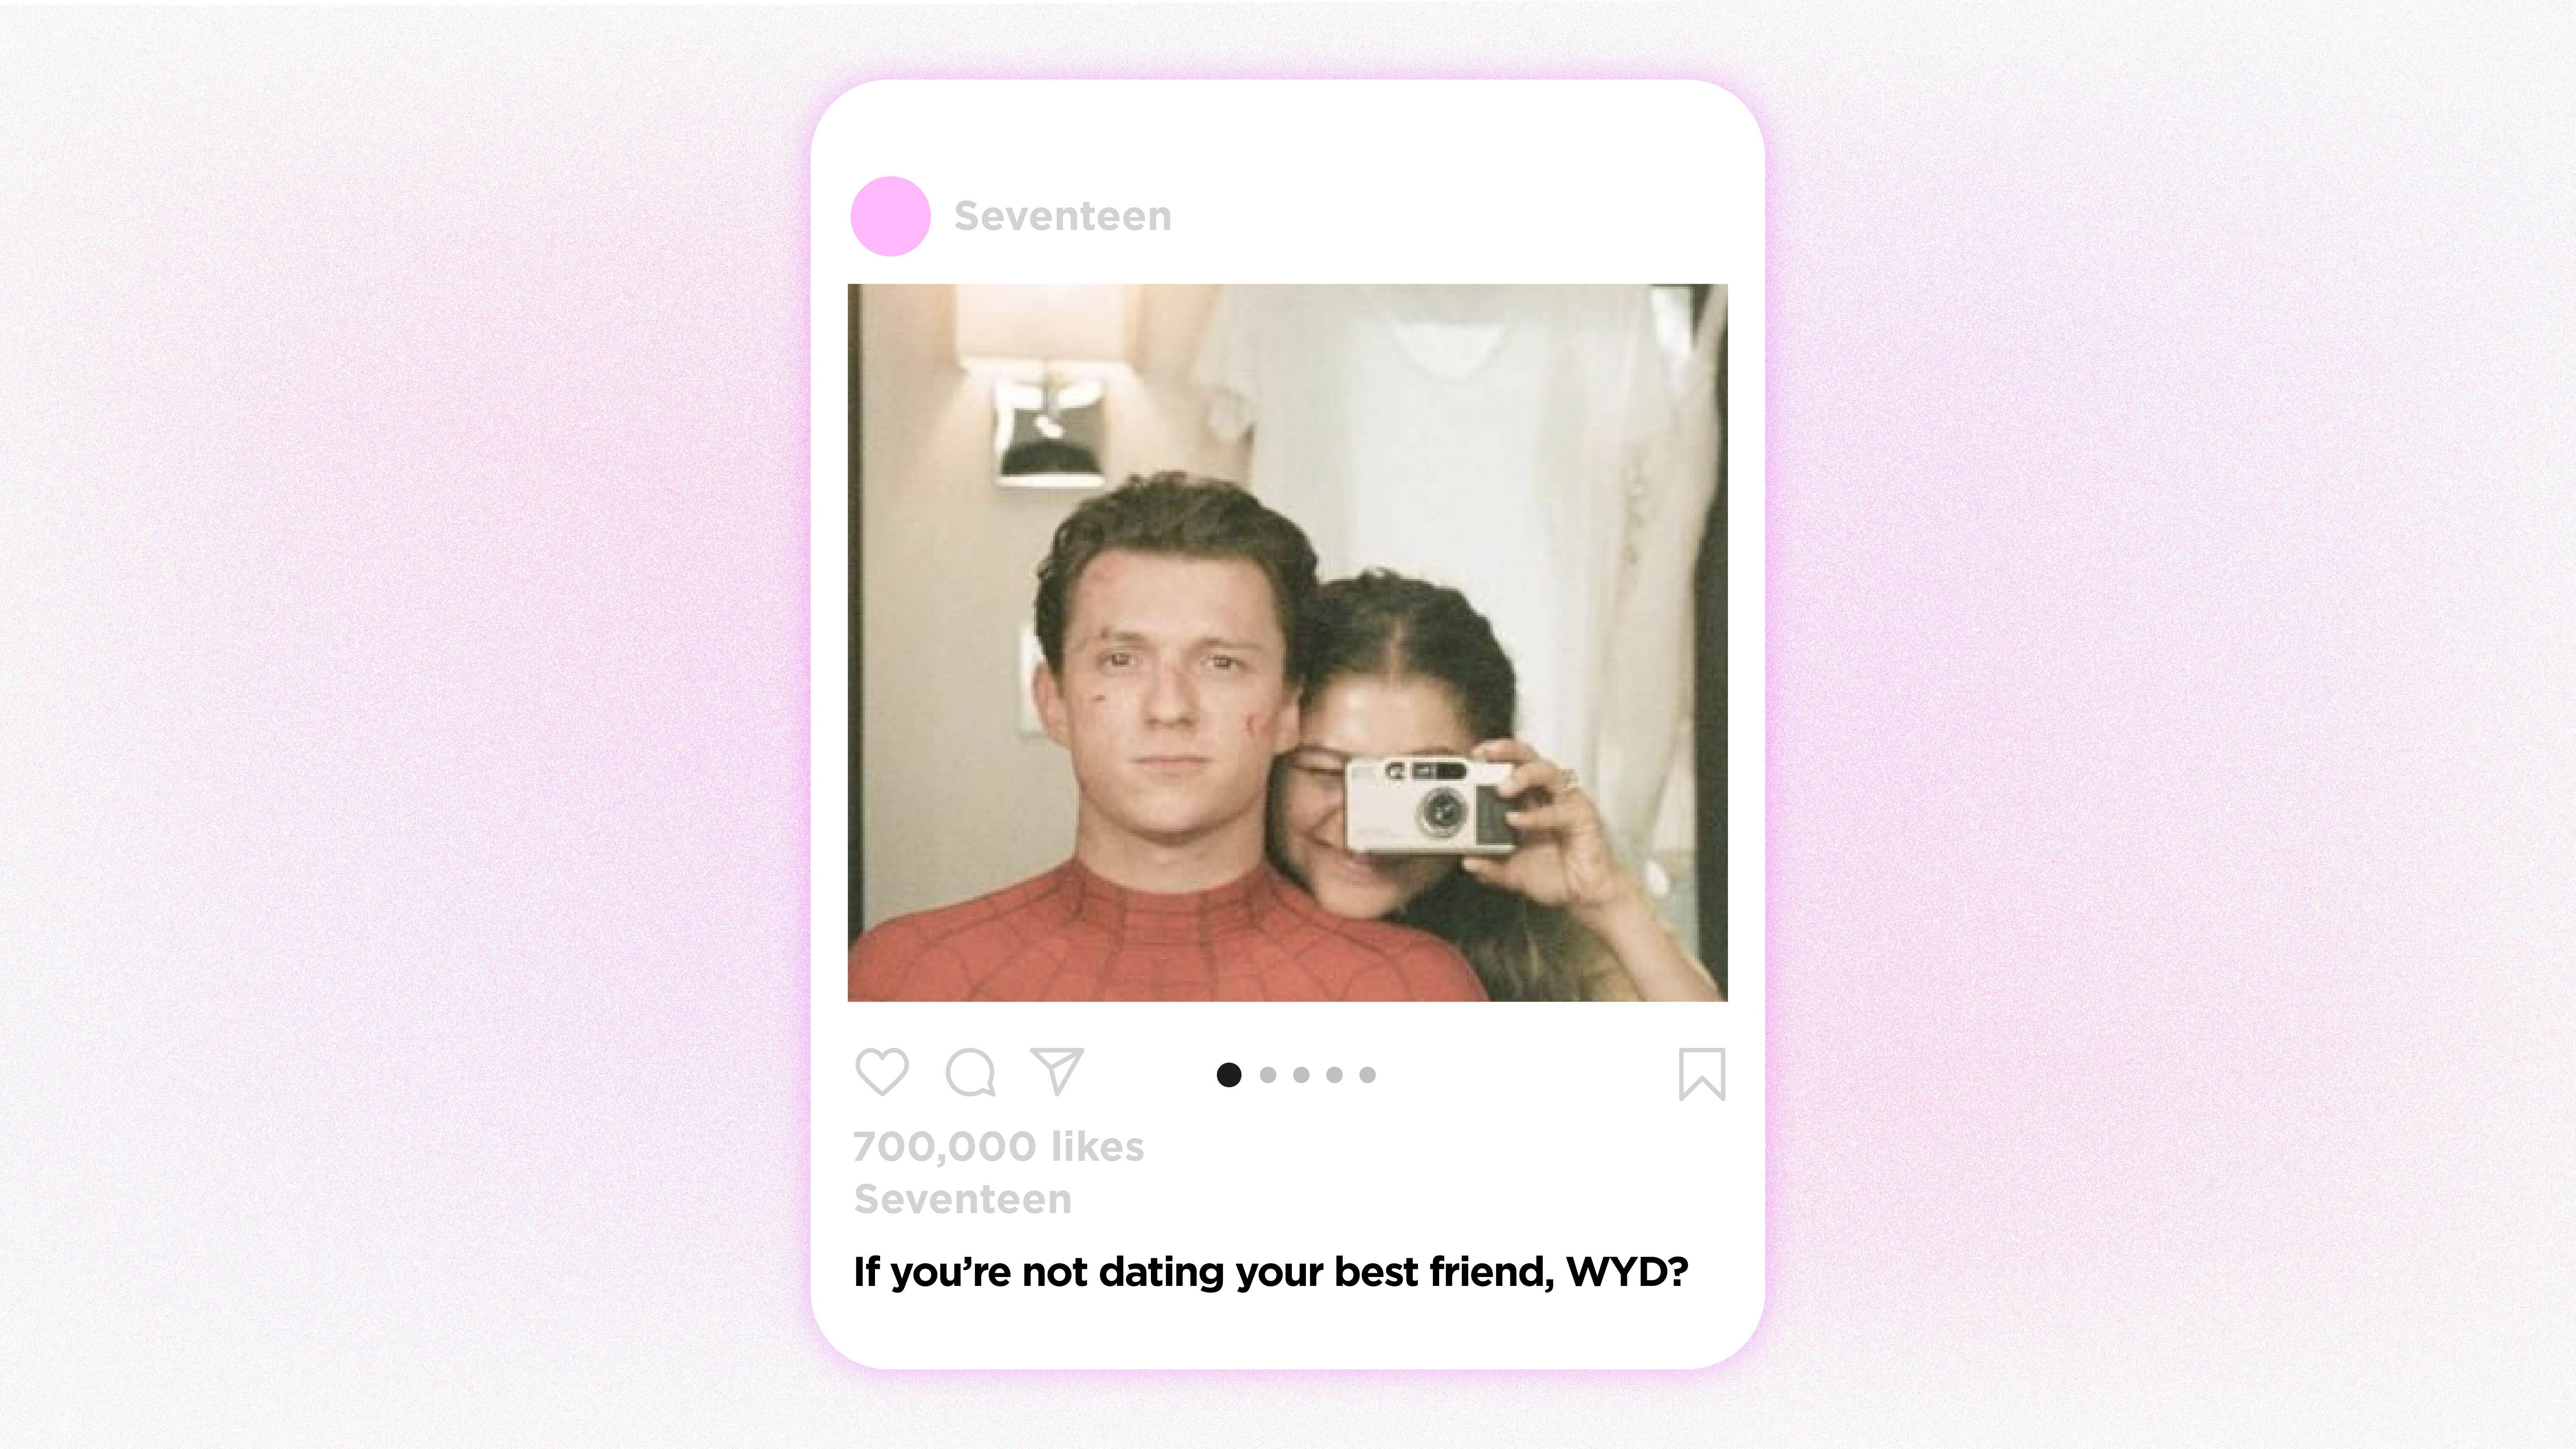 funny instagram quotes about relationships